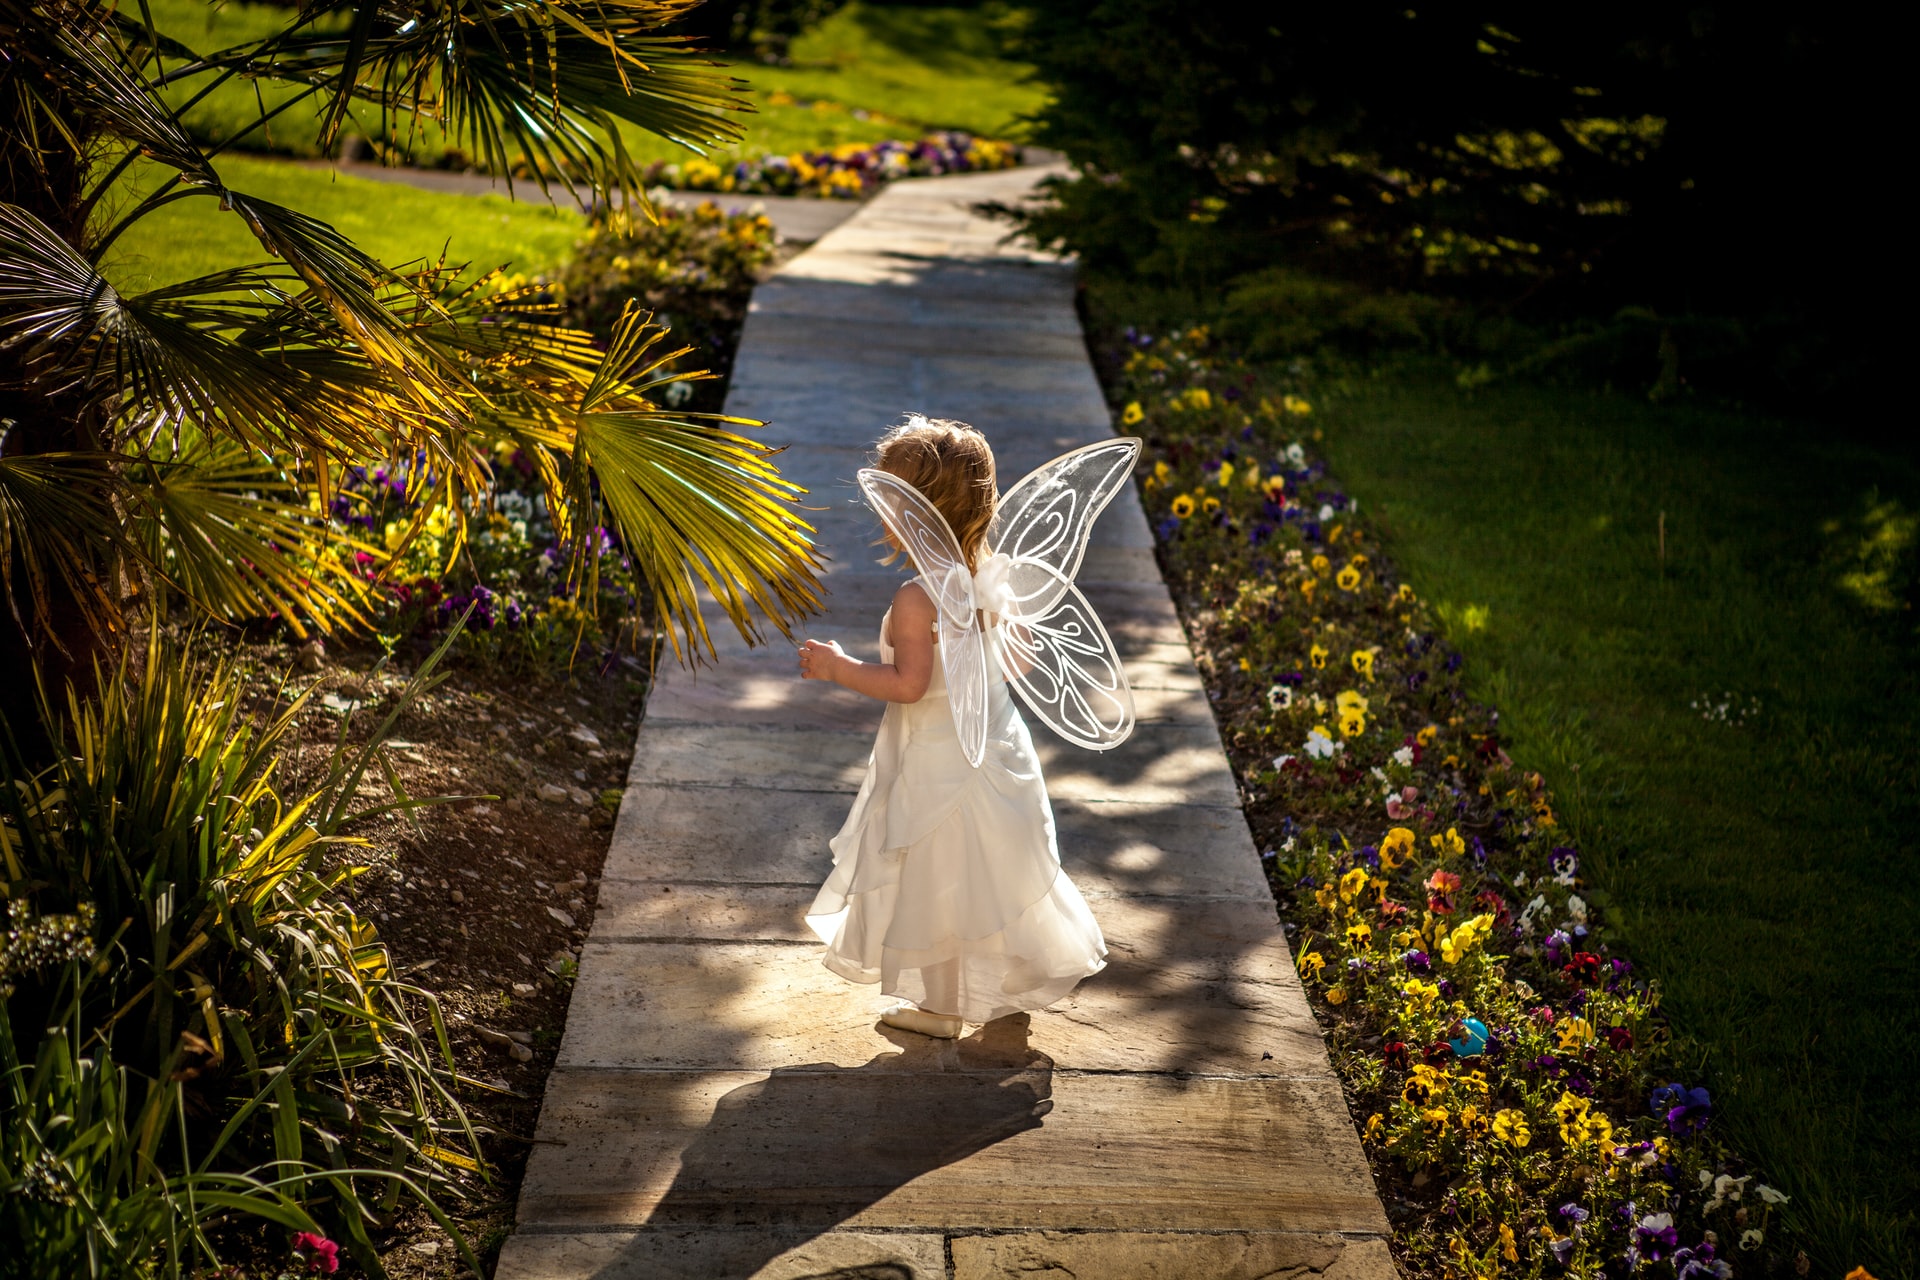 Small child with wings on garden path